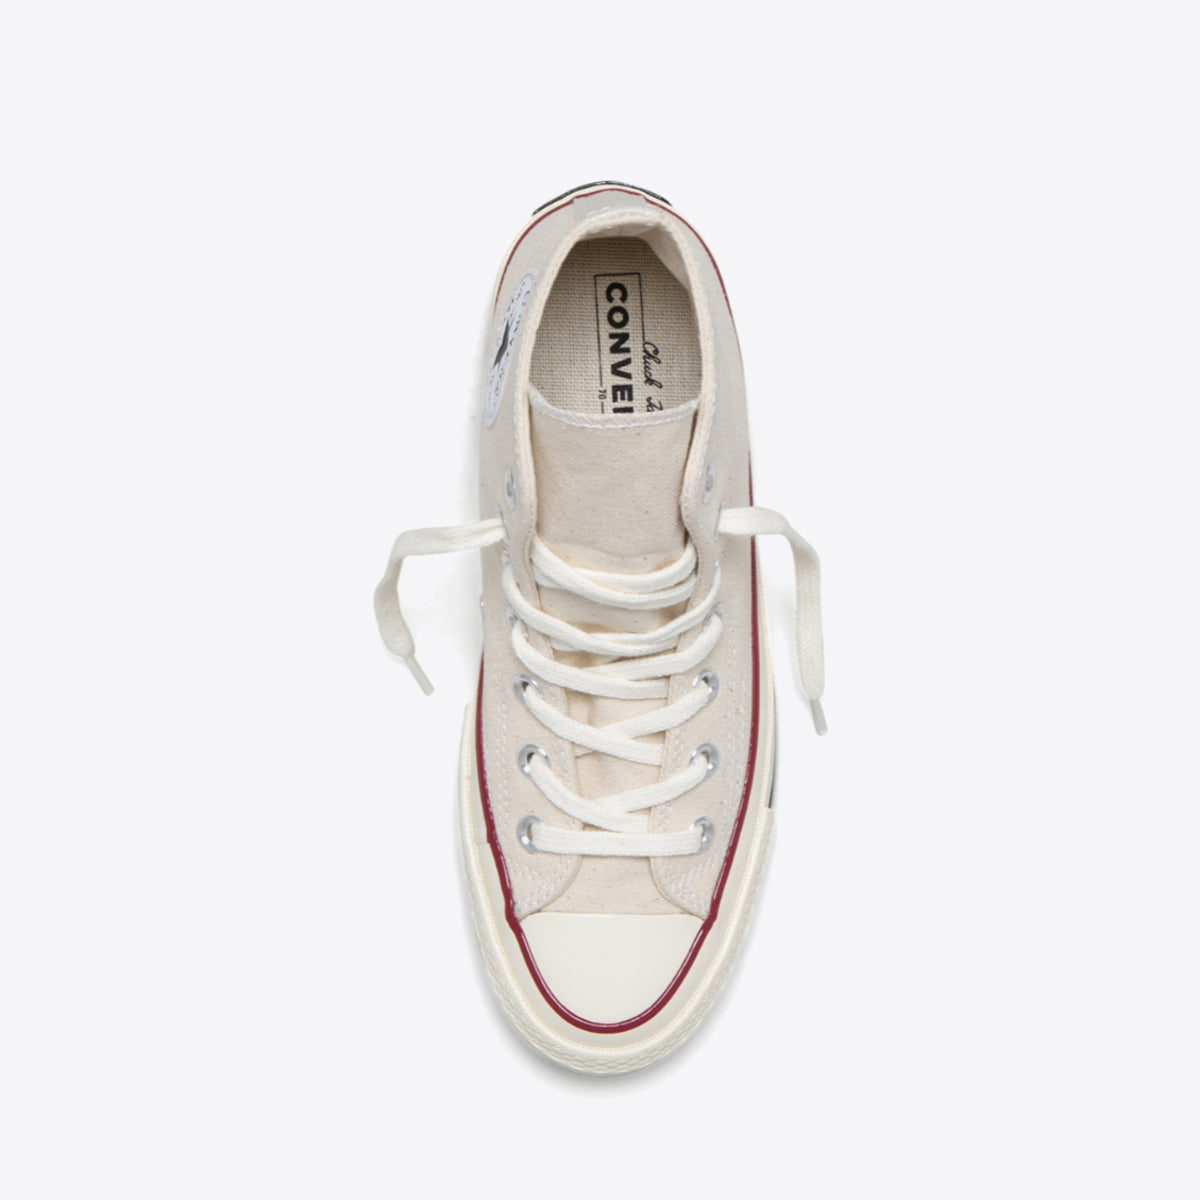 CONVERSE Chuck Taylor All Star 70 Canvas High Parchment - Image 5